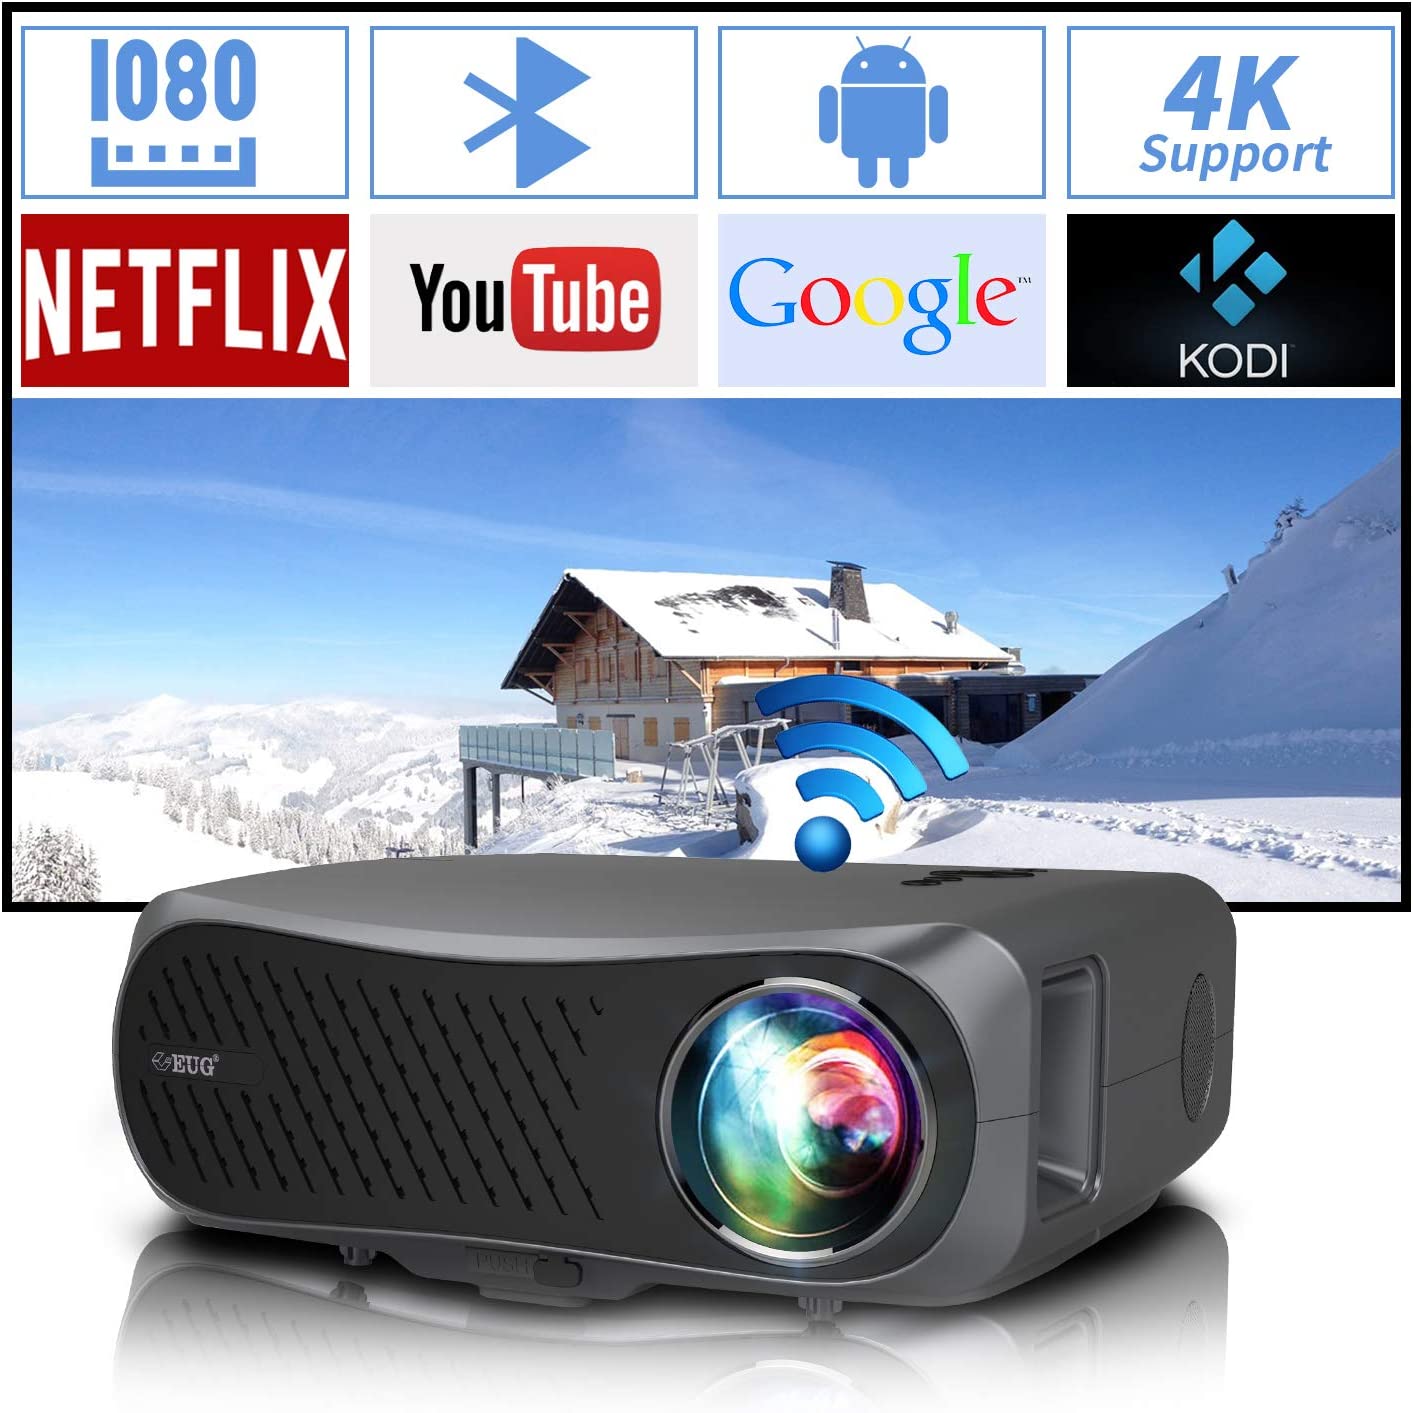 ZCGIOBN Projector Review - WiFi Bluetooth 1080P Projector